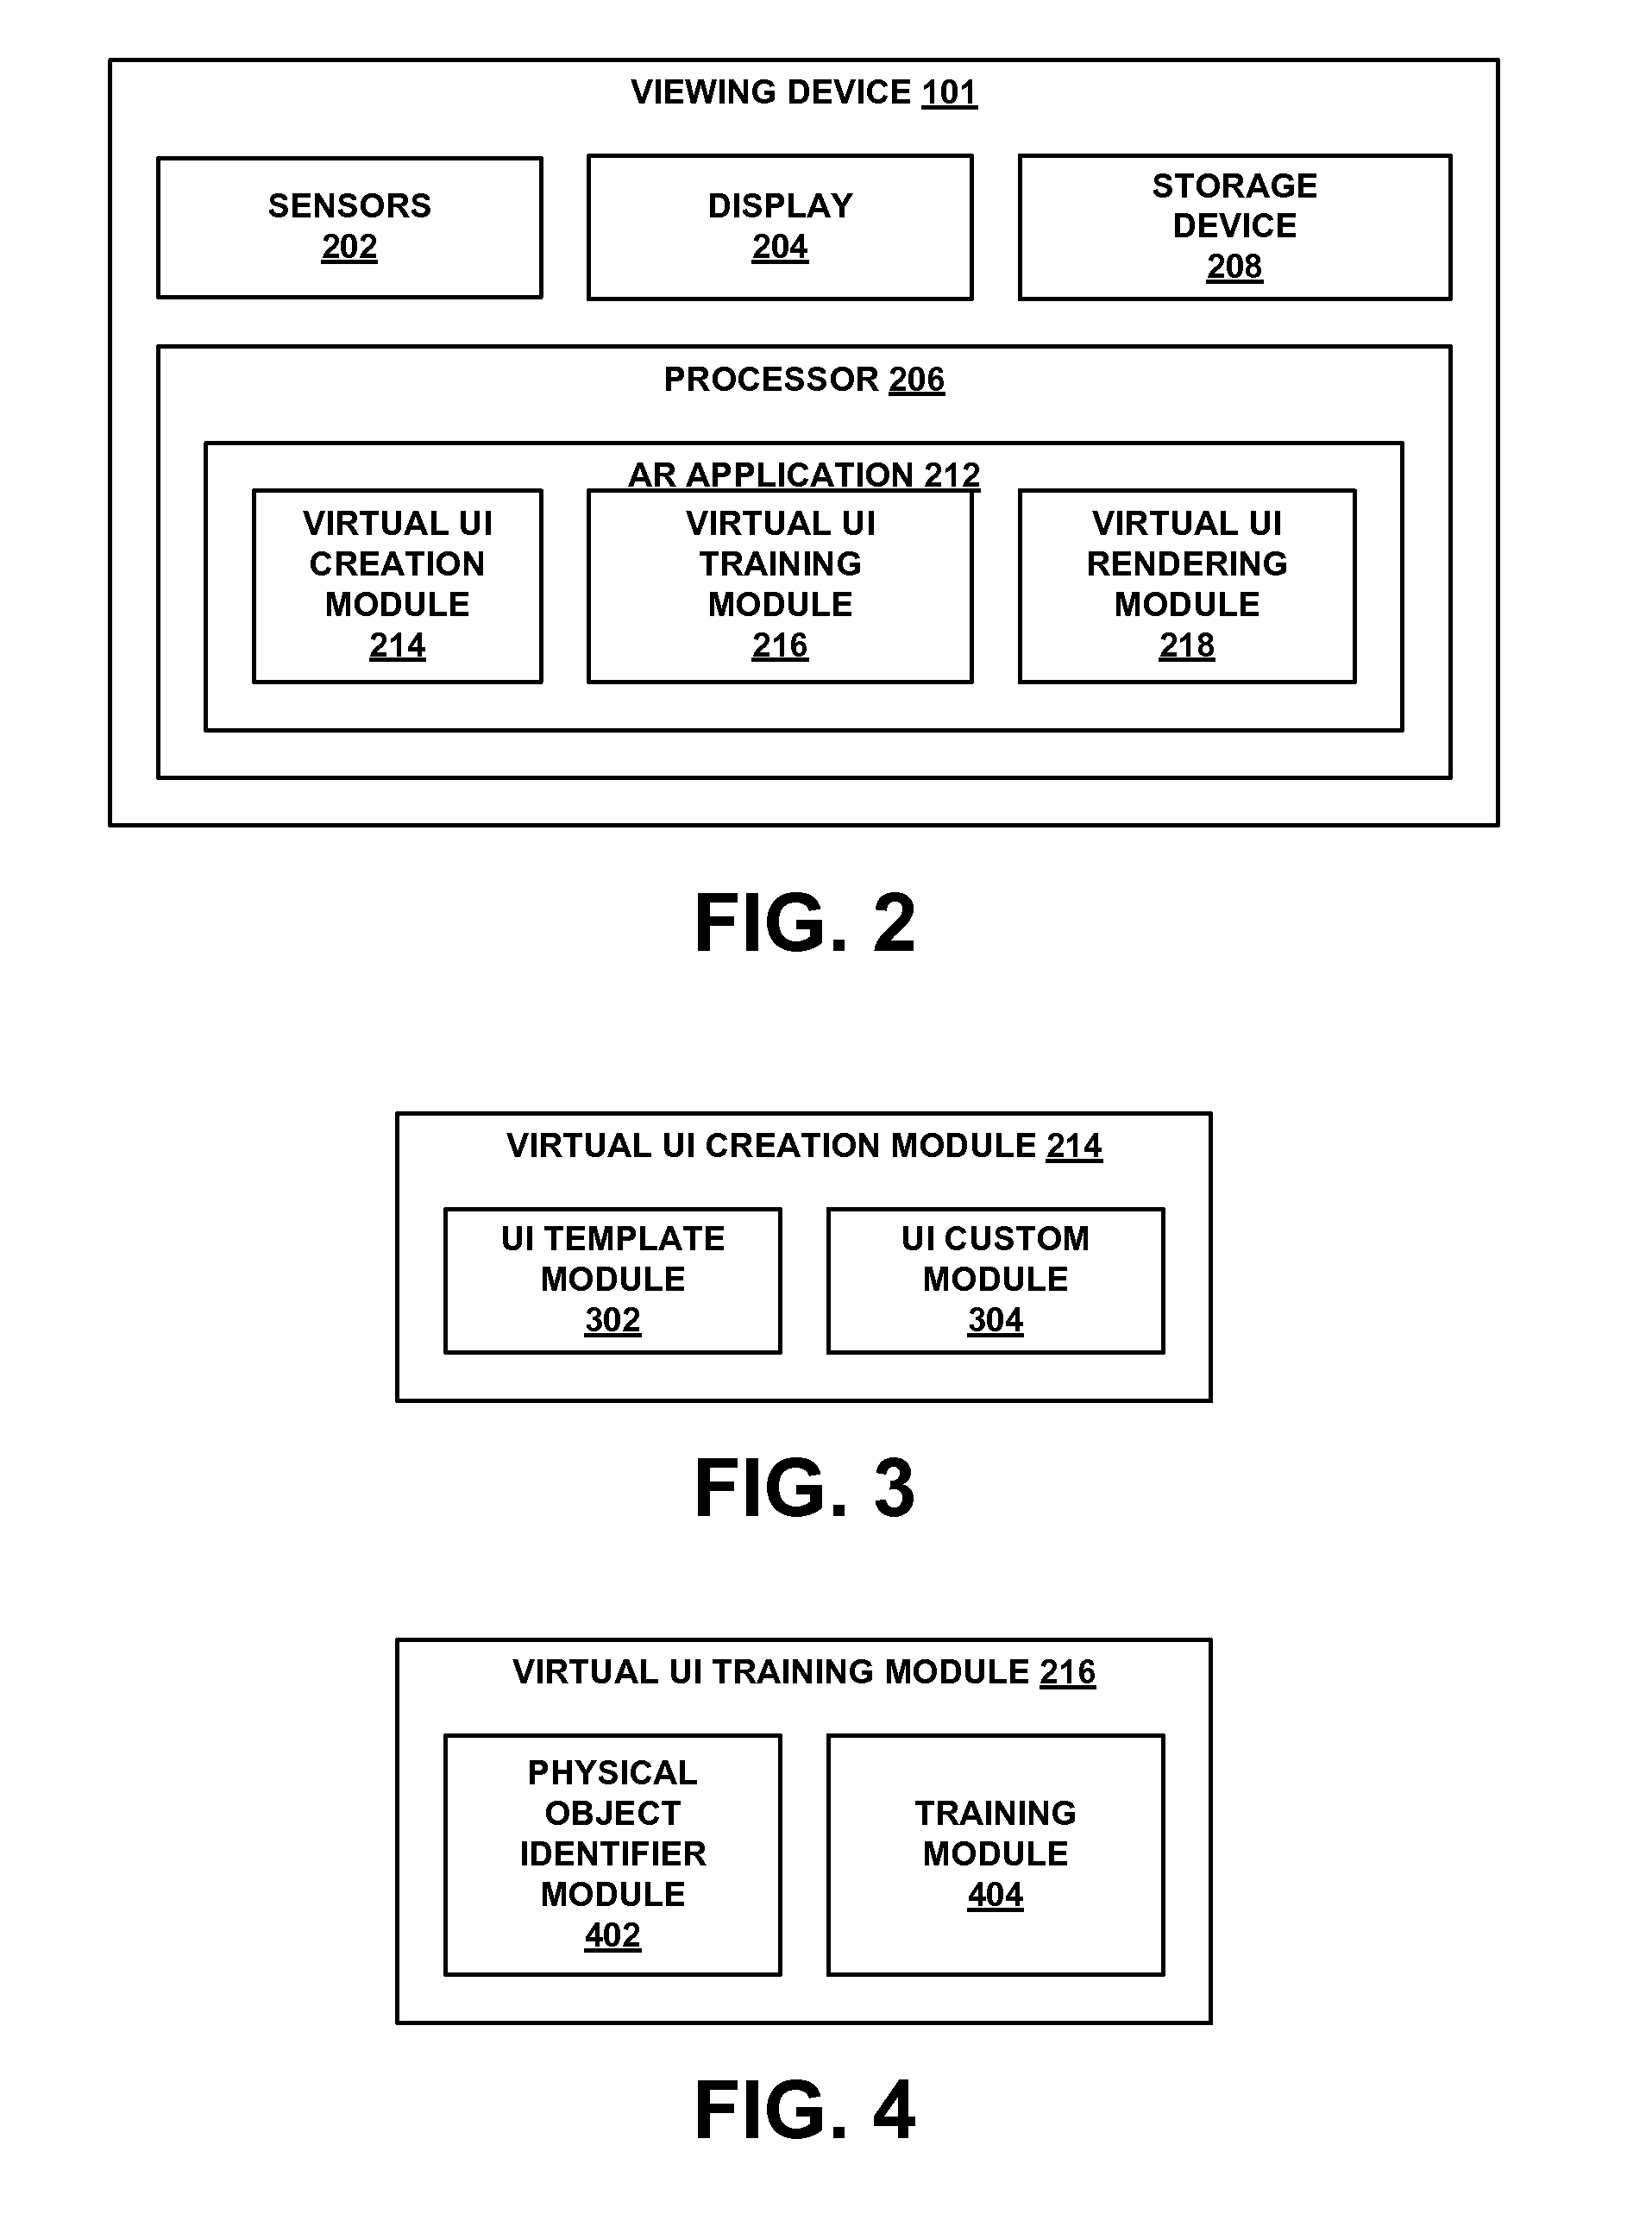 Assigning a virtual user interface to a physical object